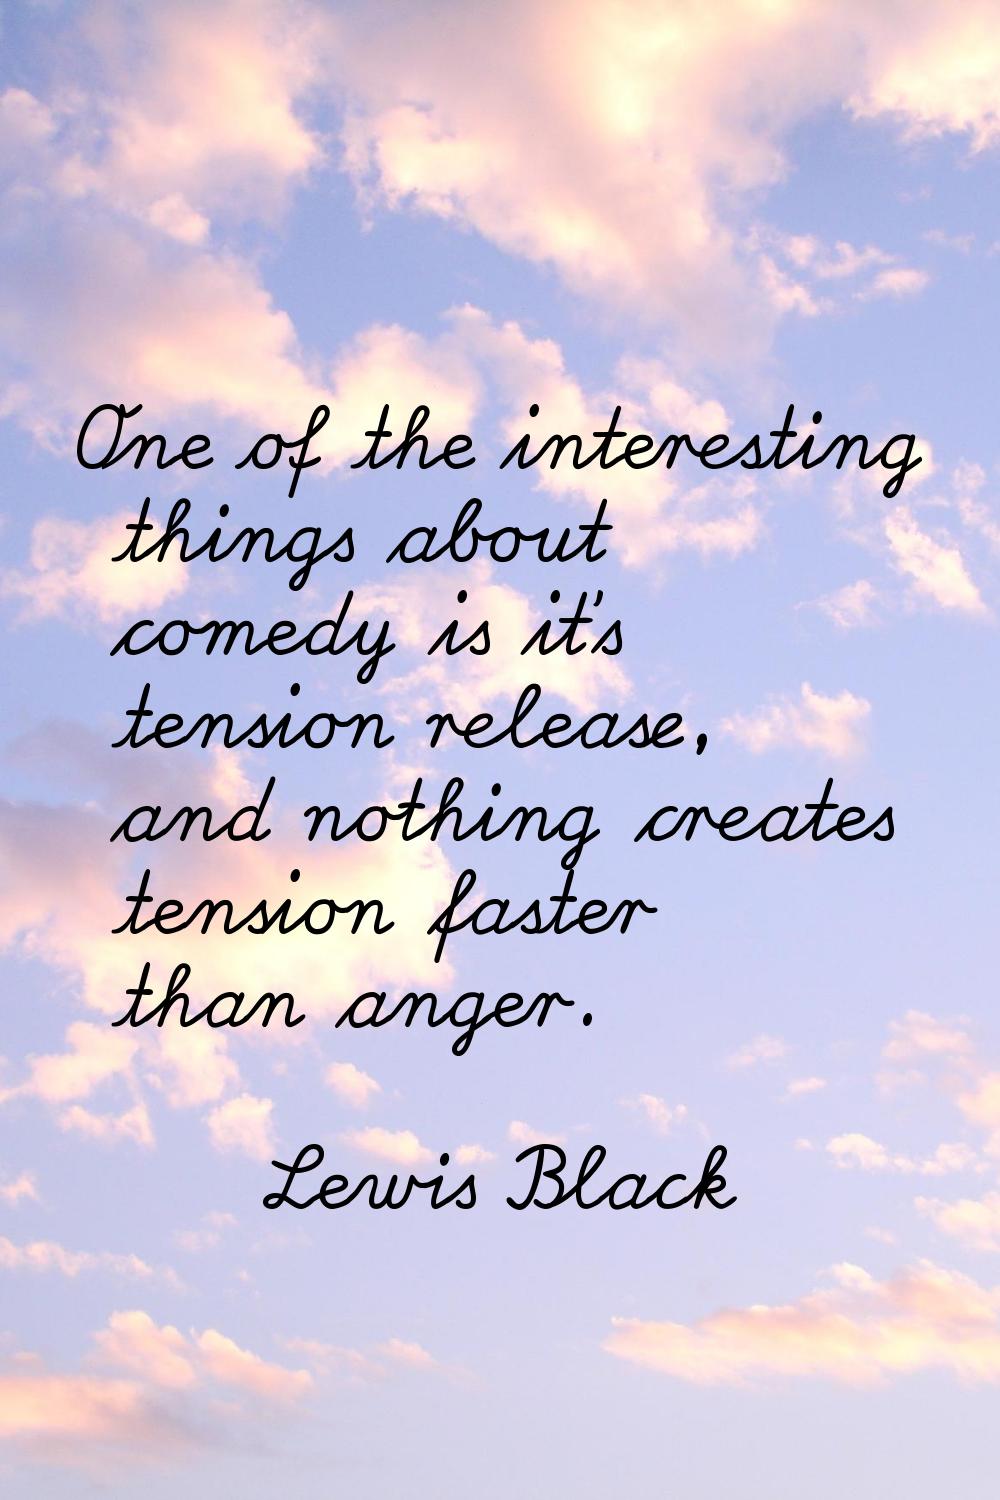 One of the interesting things about comedy is it's tension release, and nothing creates tension fas